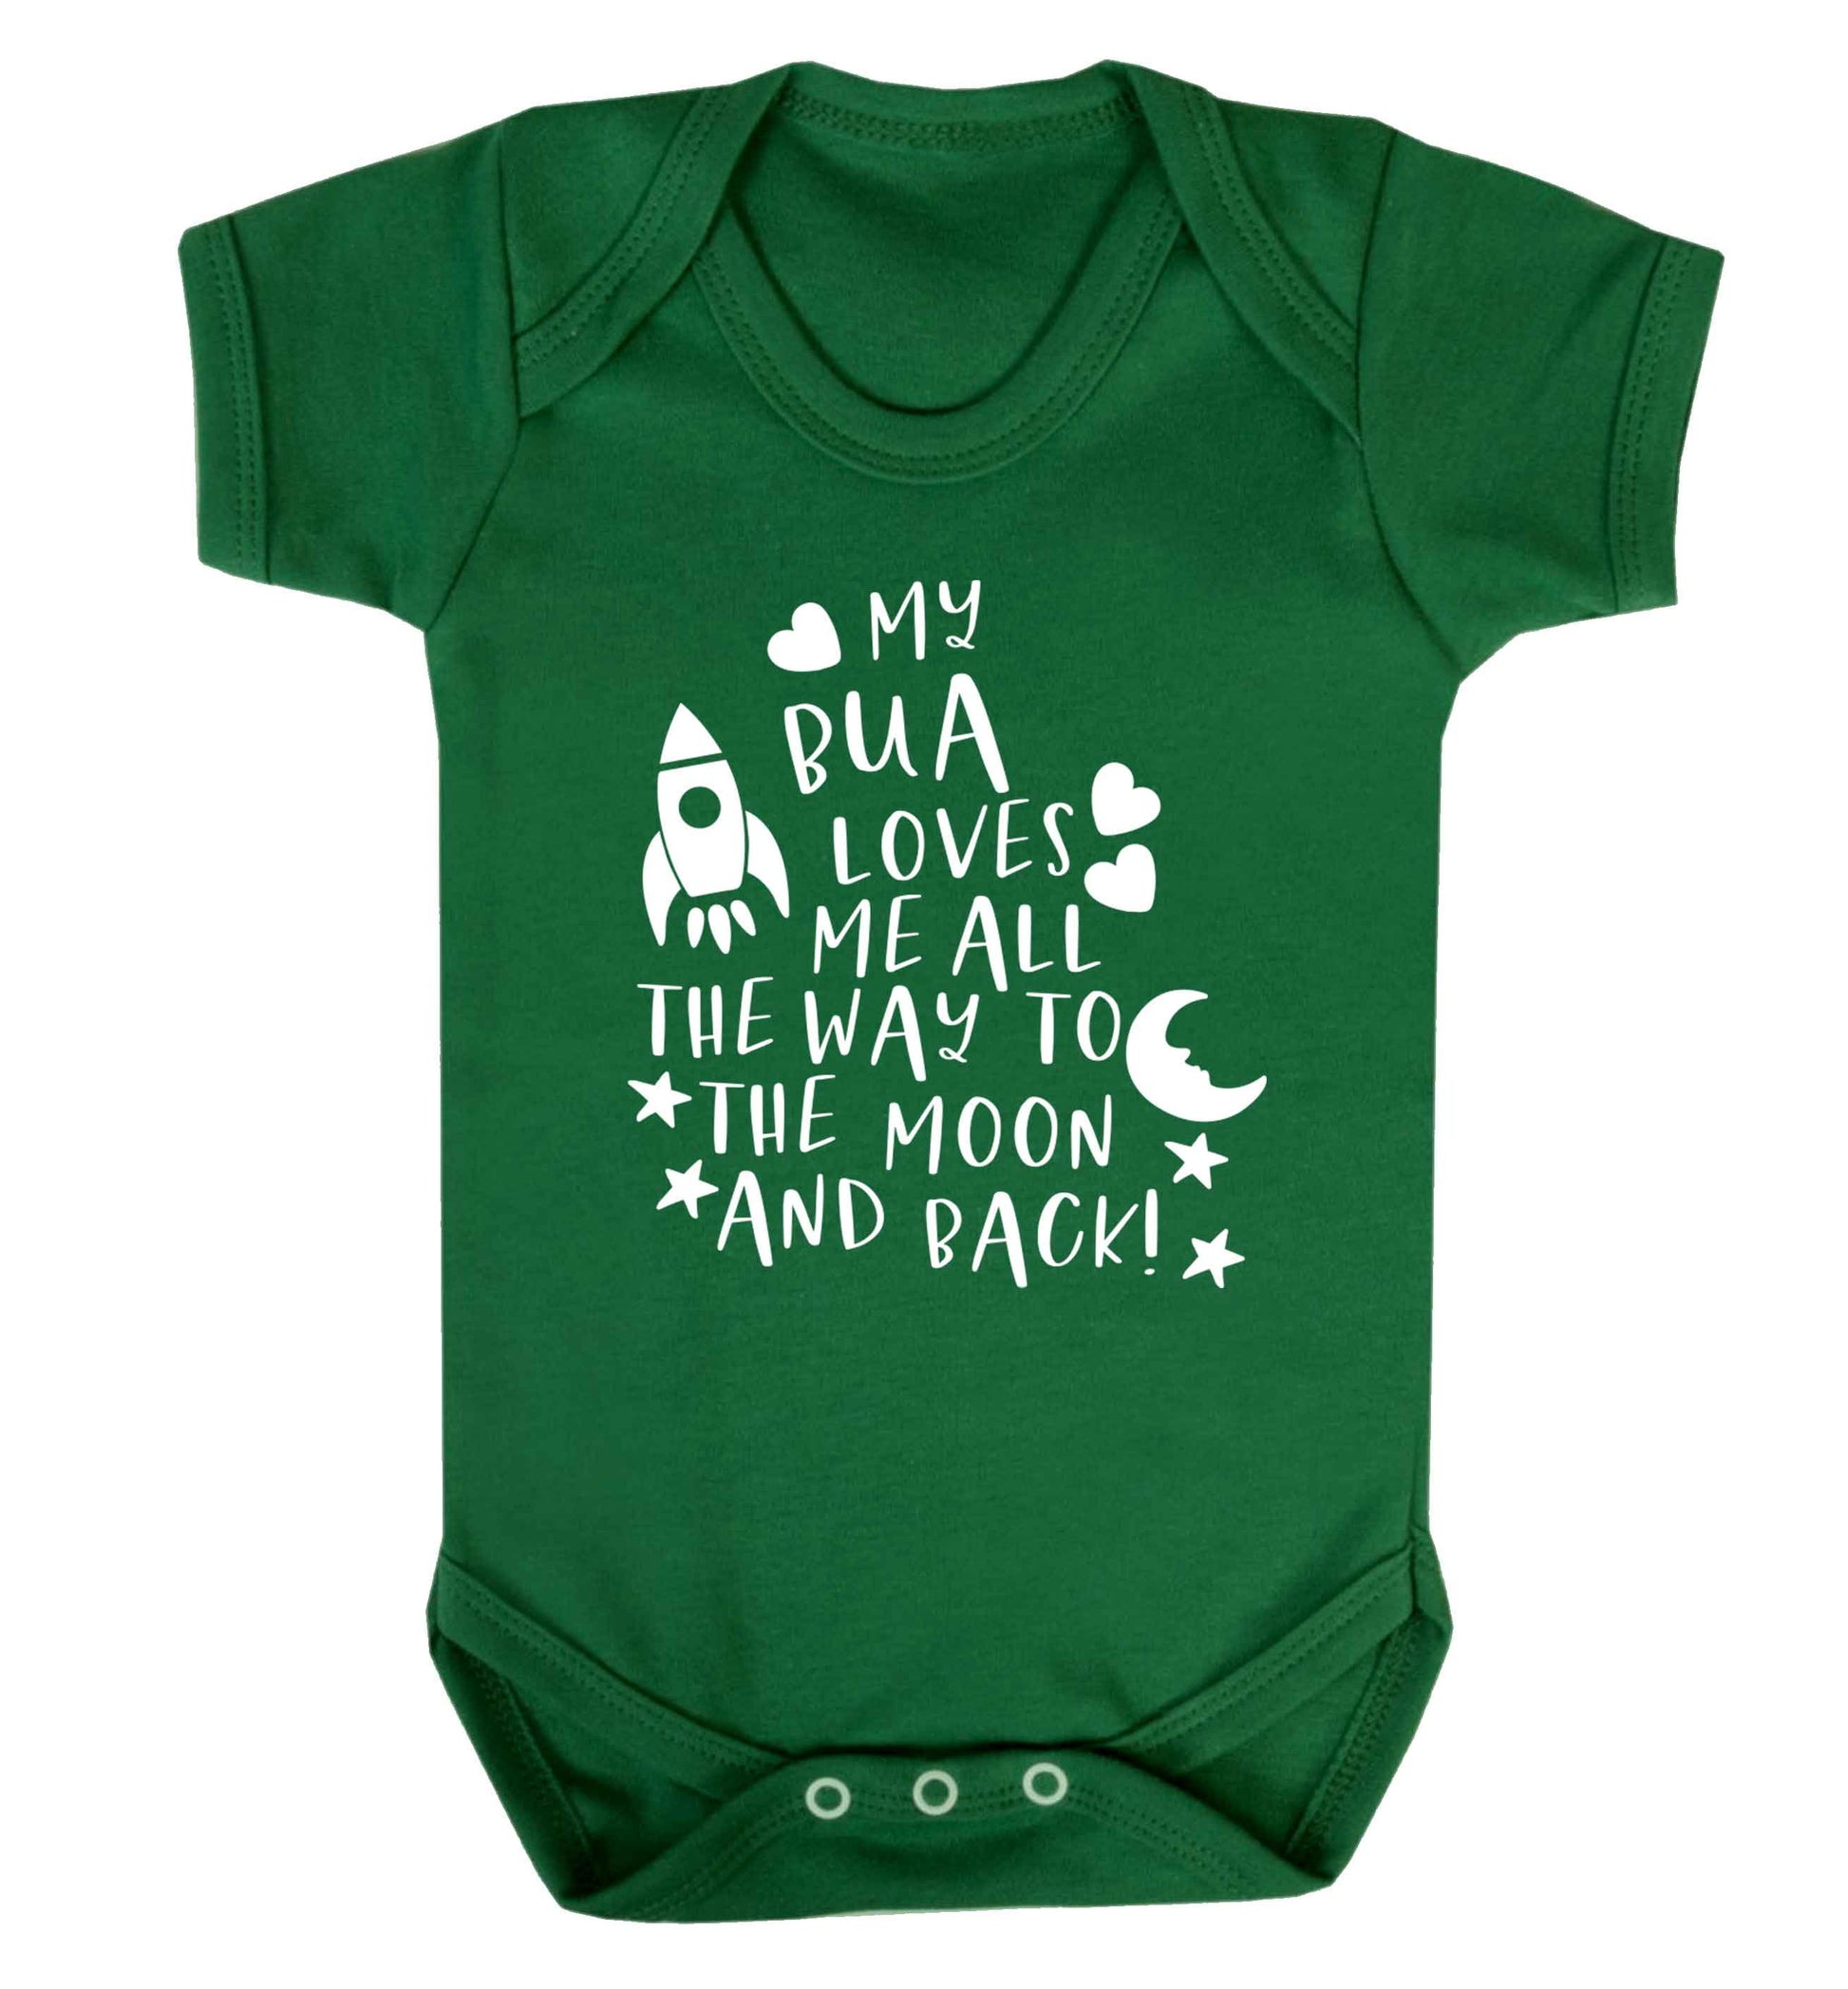 My bua loves me all they way to the moon and back Baby Vest green 18-24 months